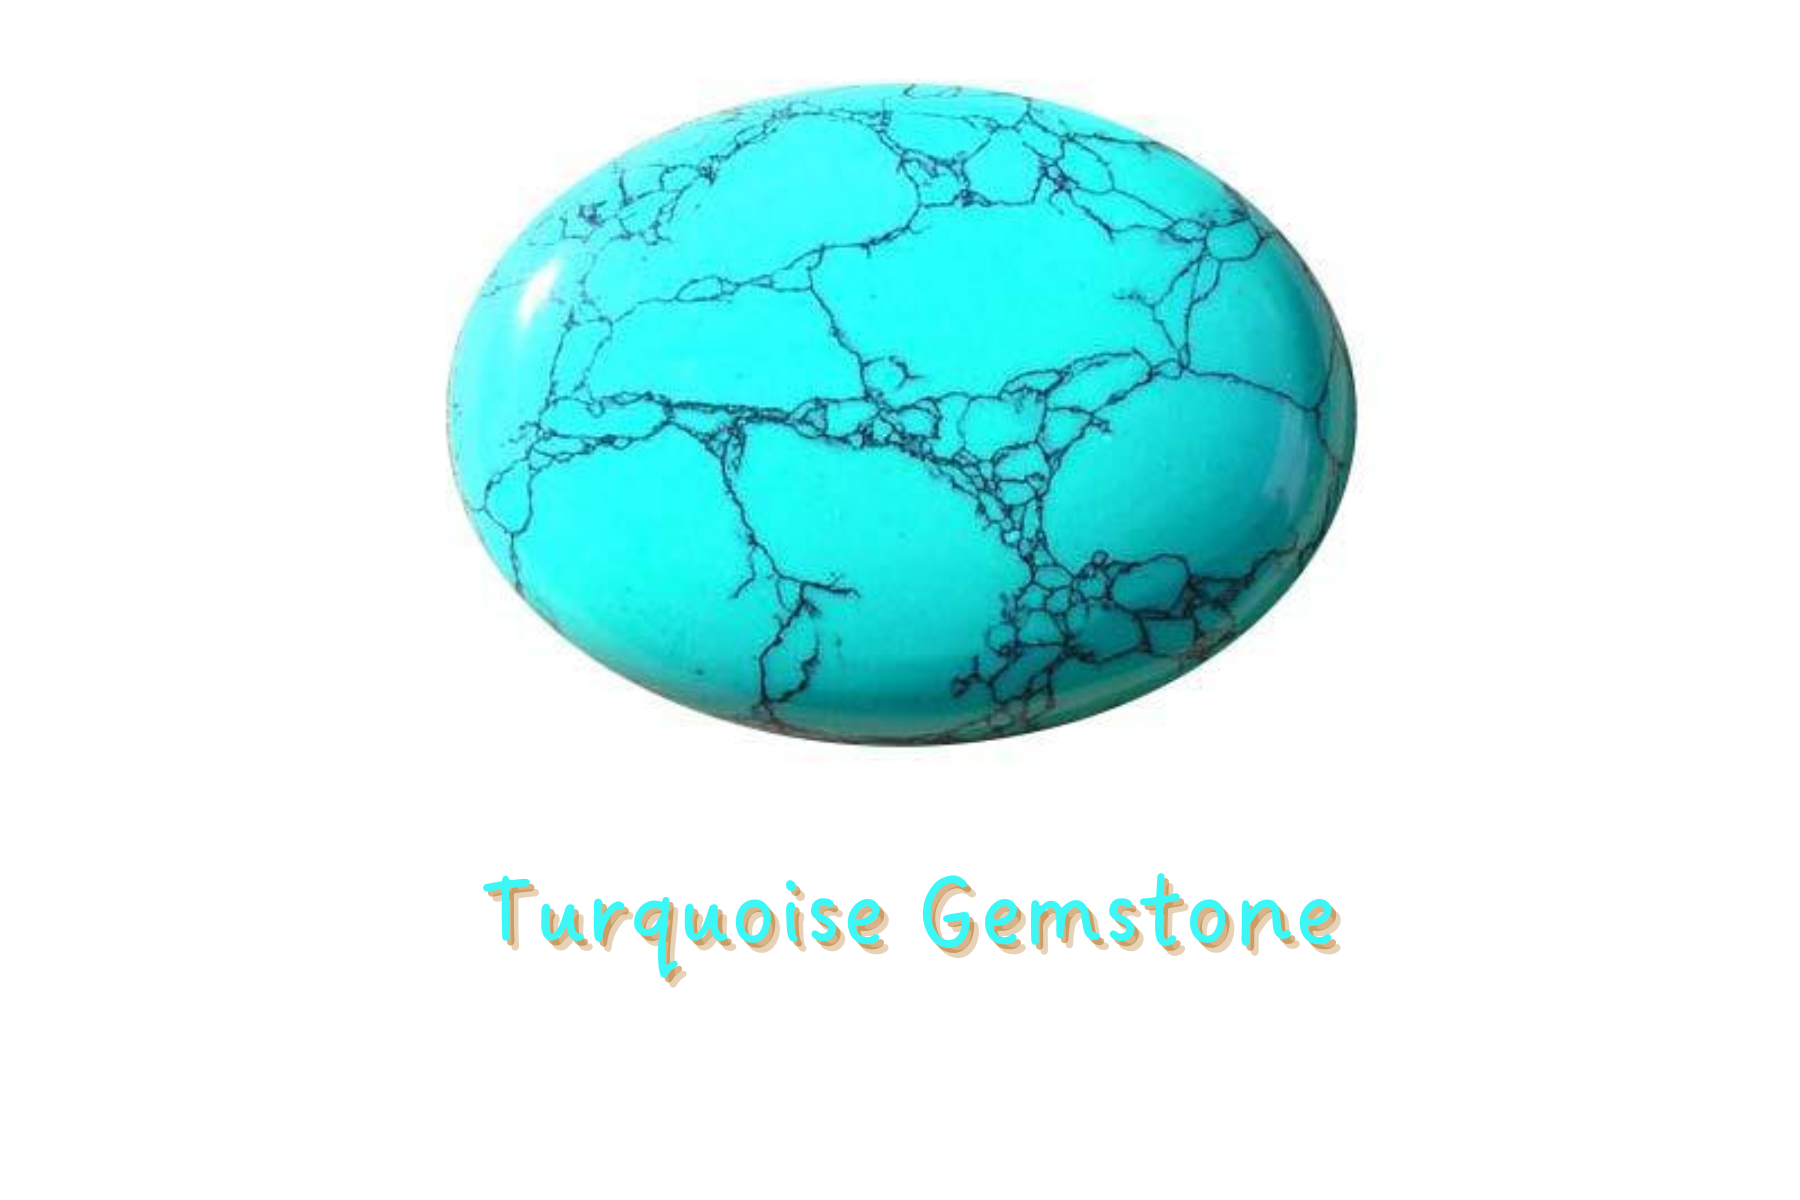 Oblong turquoise stone with dark blue messy lines